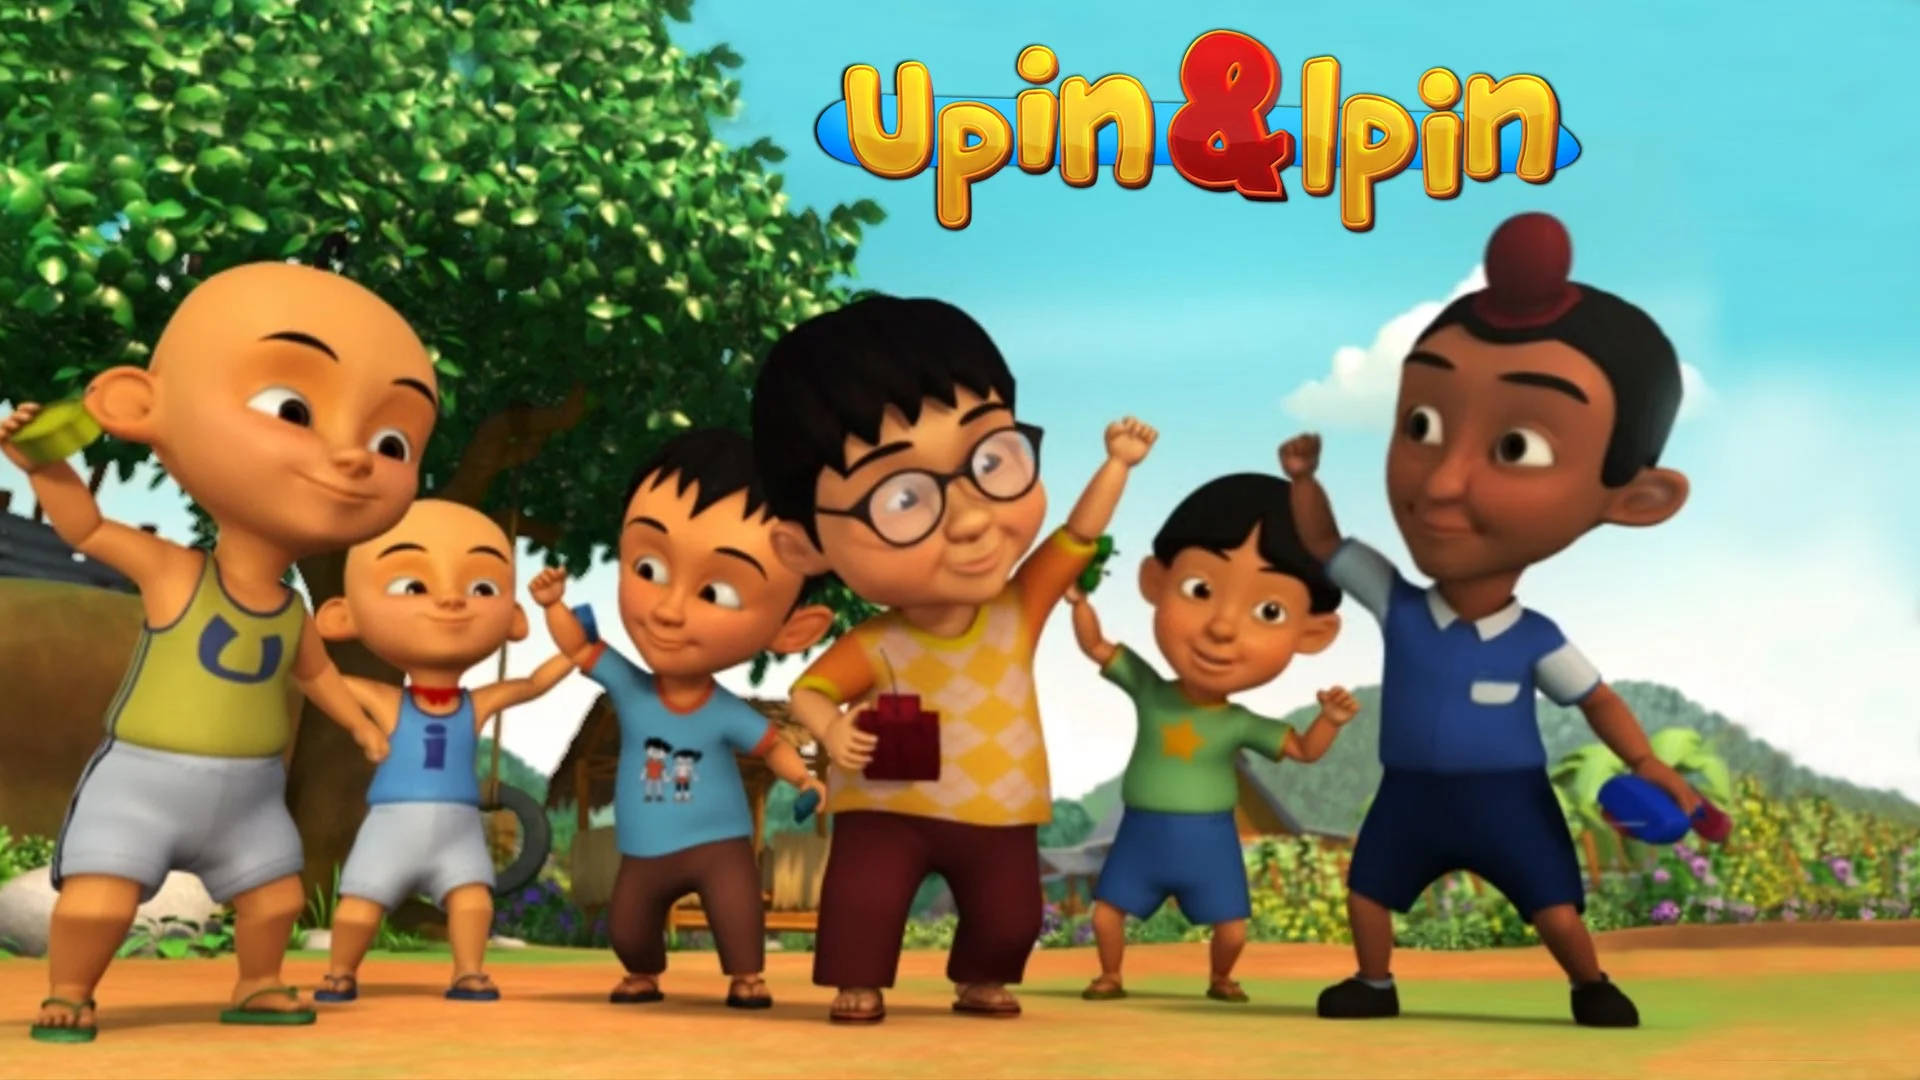 Upin Ipin Playing With Friends Wallpaper